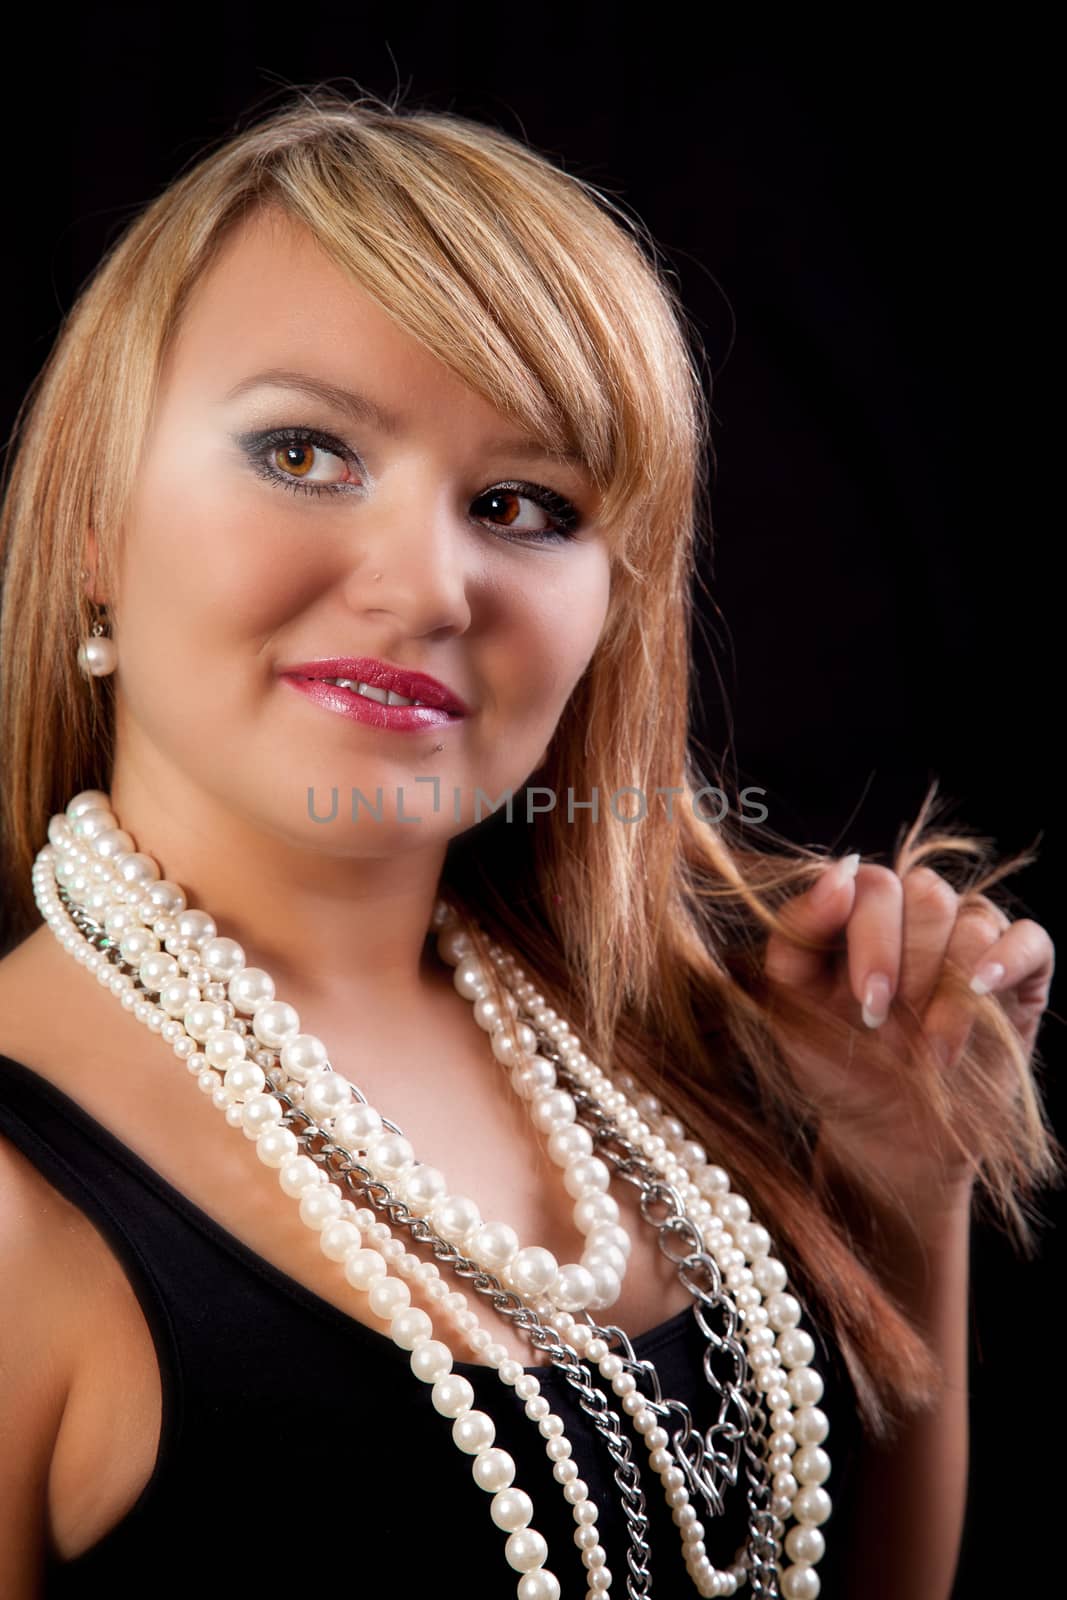 Young blonde Woman in a black top with pearl necklaces